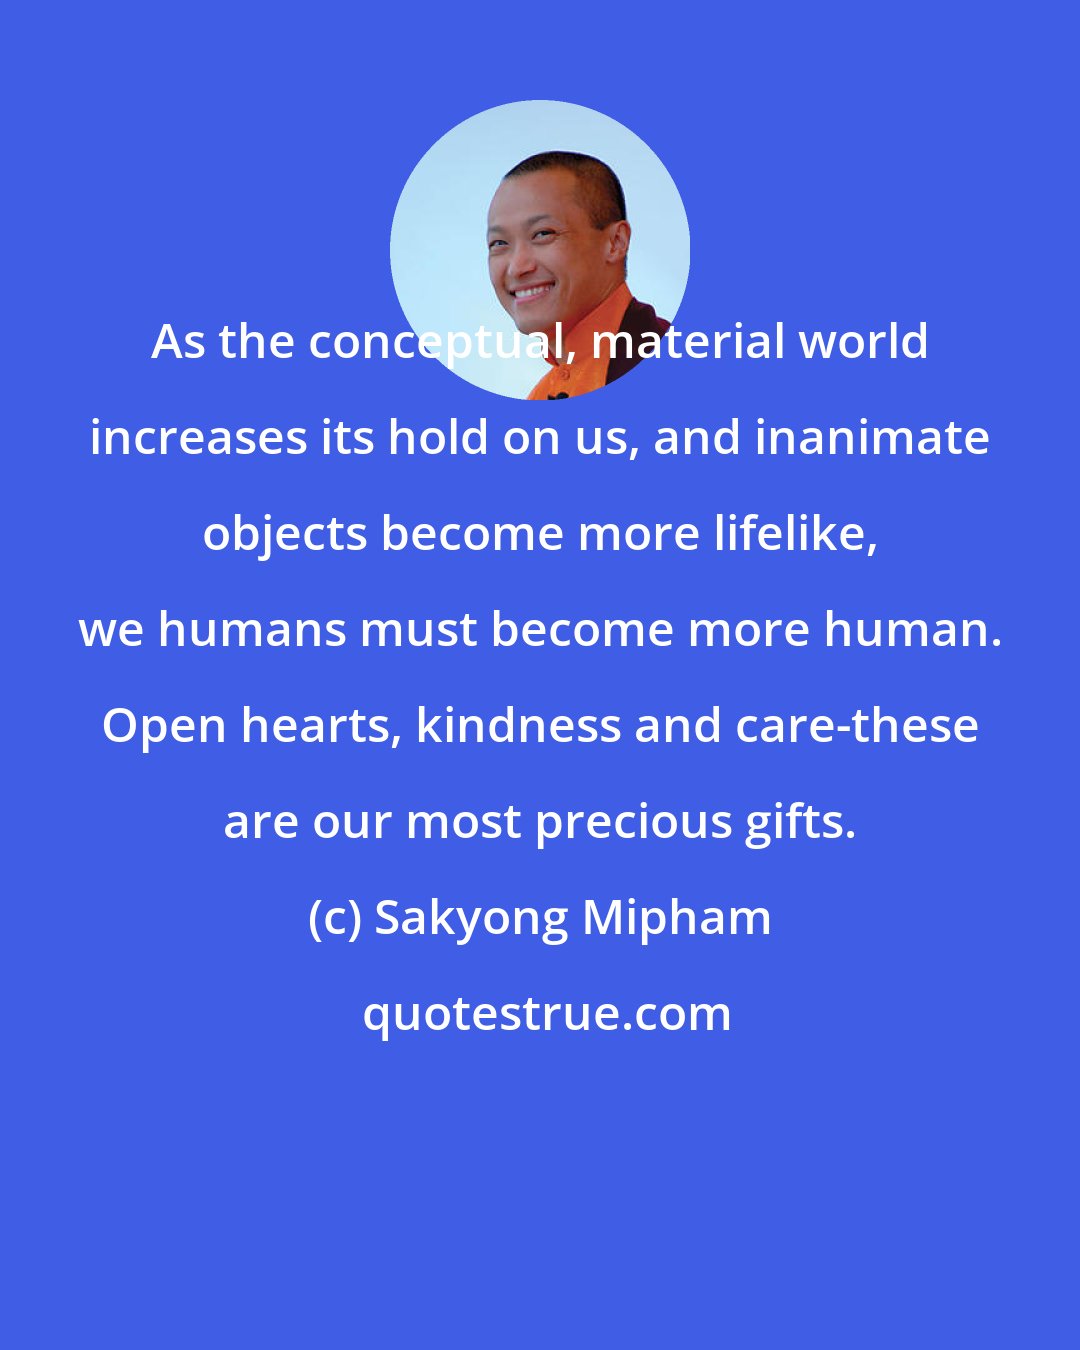 Sakyong Mipham: As the conceptual, material world increases its hold on us, and inanimate objects become more lifelike, we humans must become more human. Open hearts, kindness and care-these are our most precious gifts.